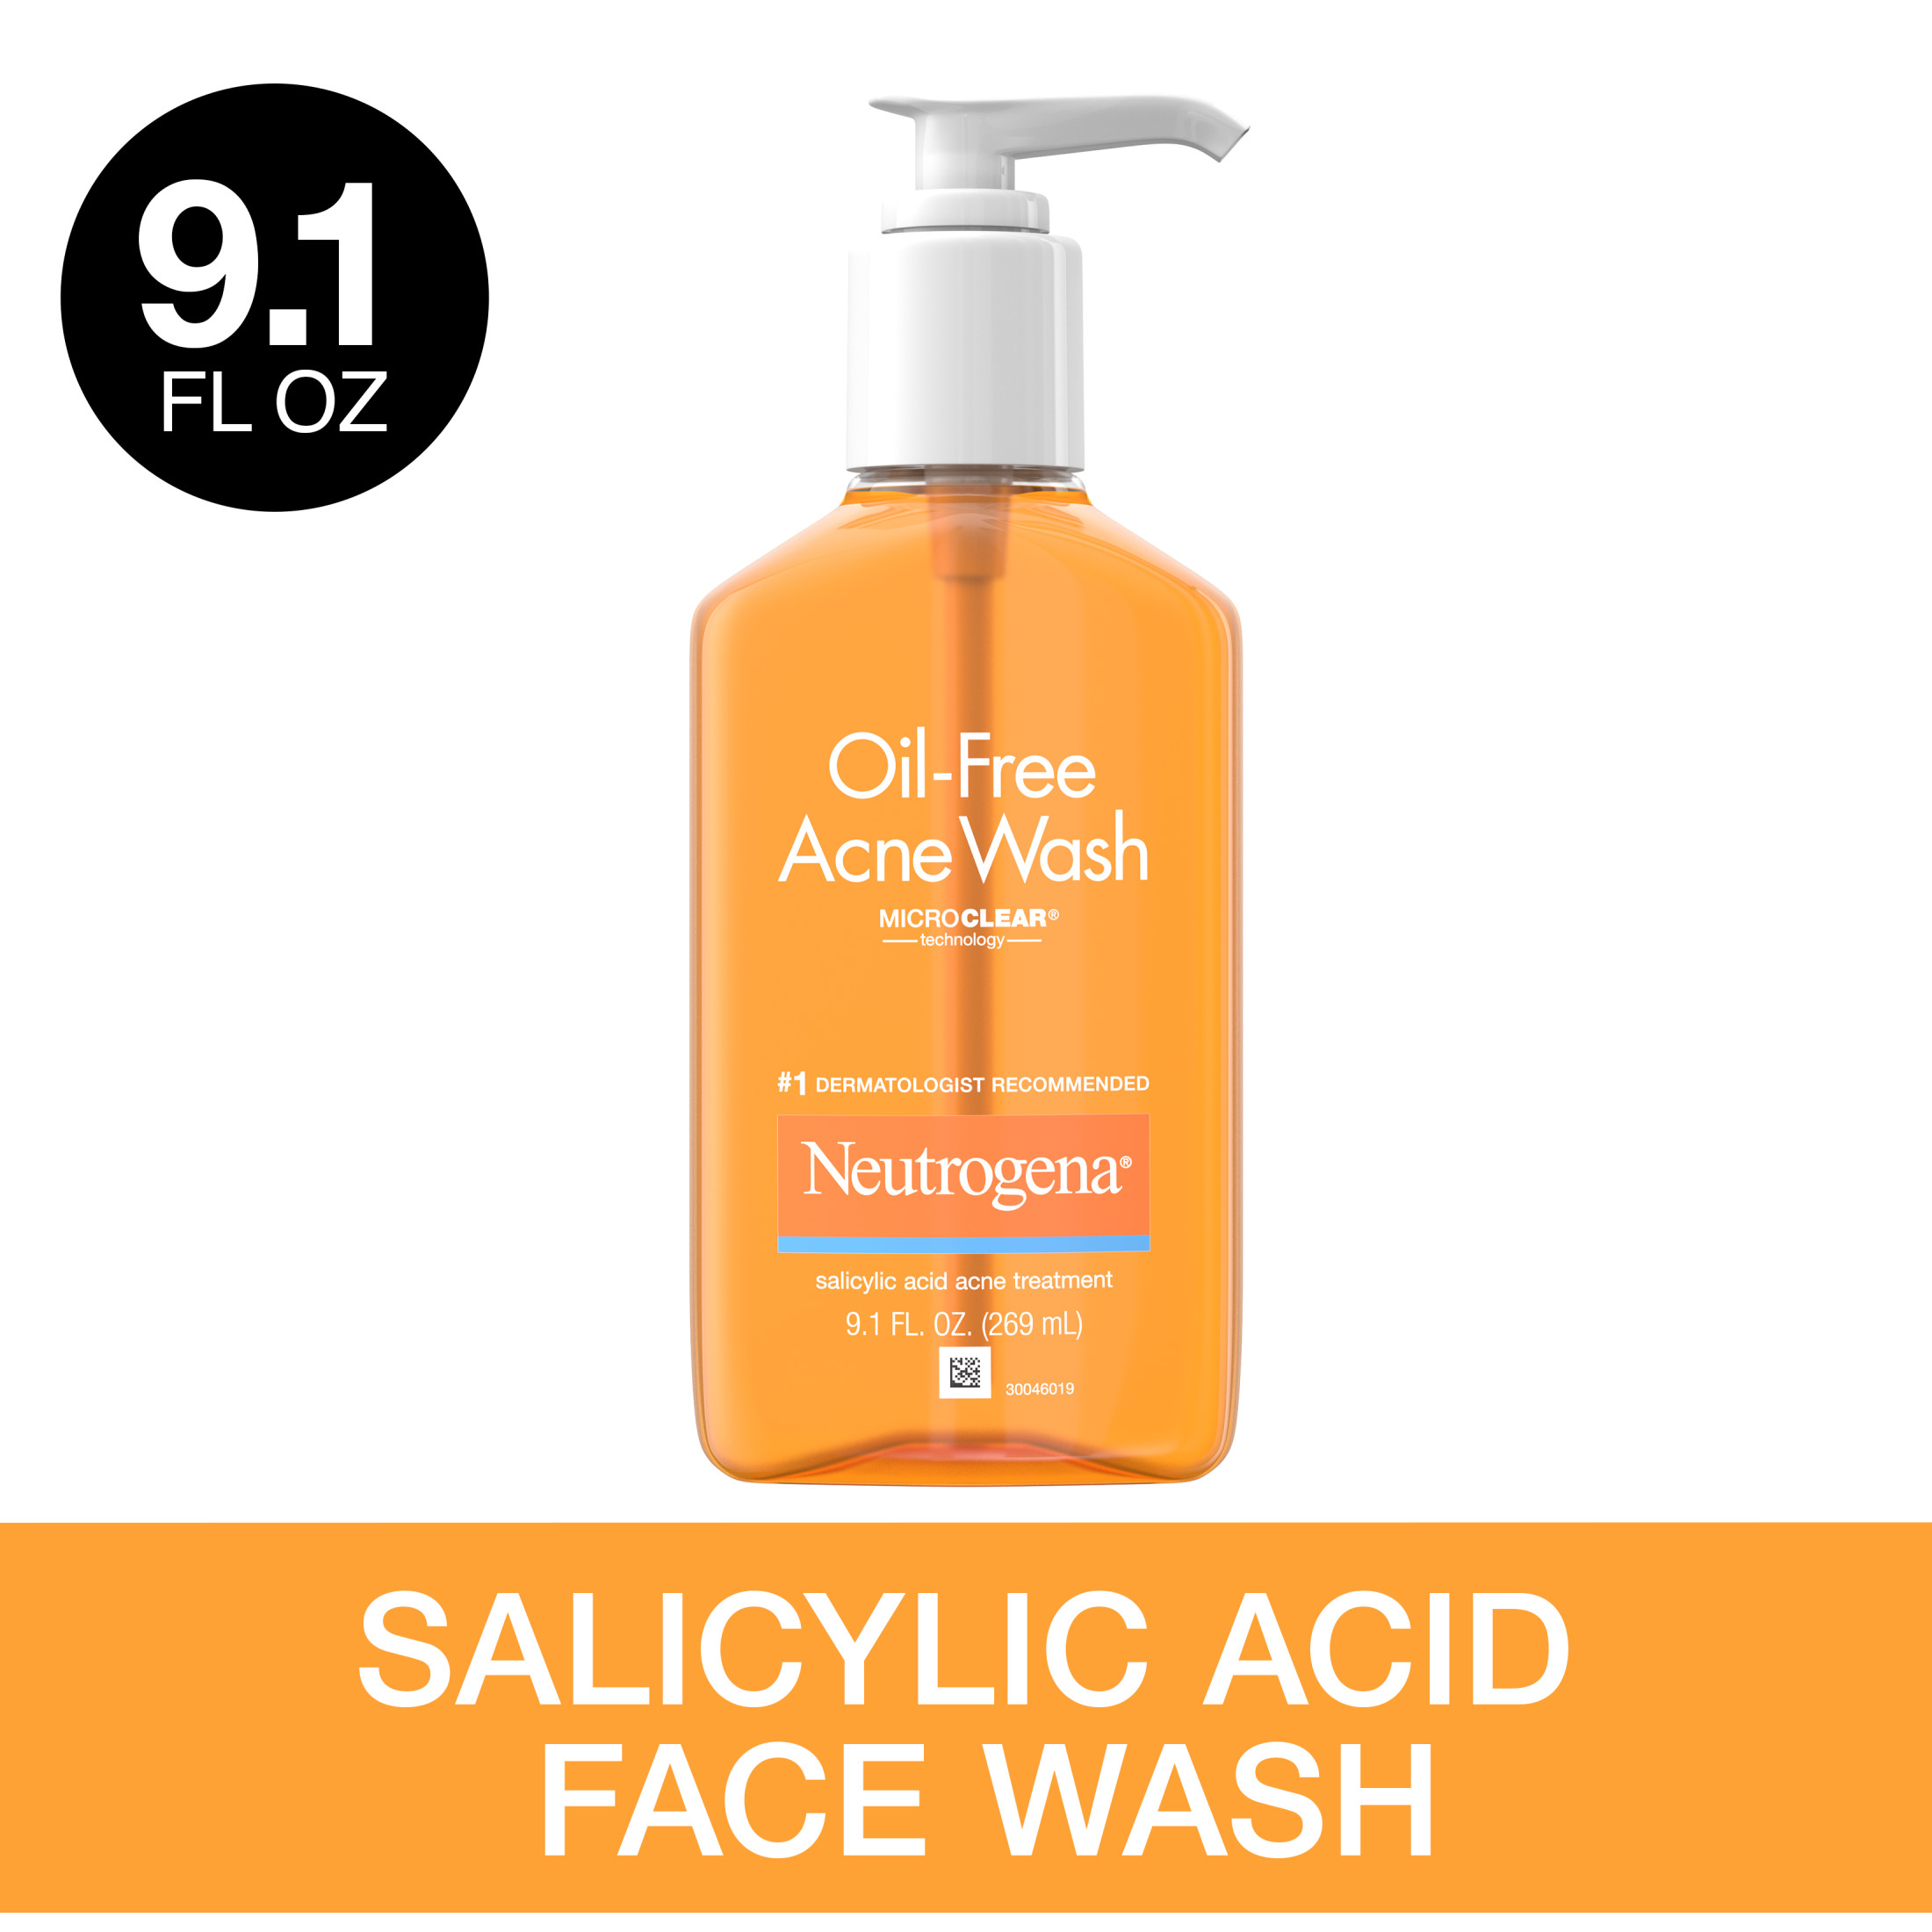 Neutrogena Oil-Free Salicylic Acid Acne Face Wash and Facial Cleanser, 9.1 fl oz - image 1 of 11